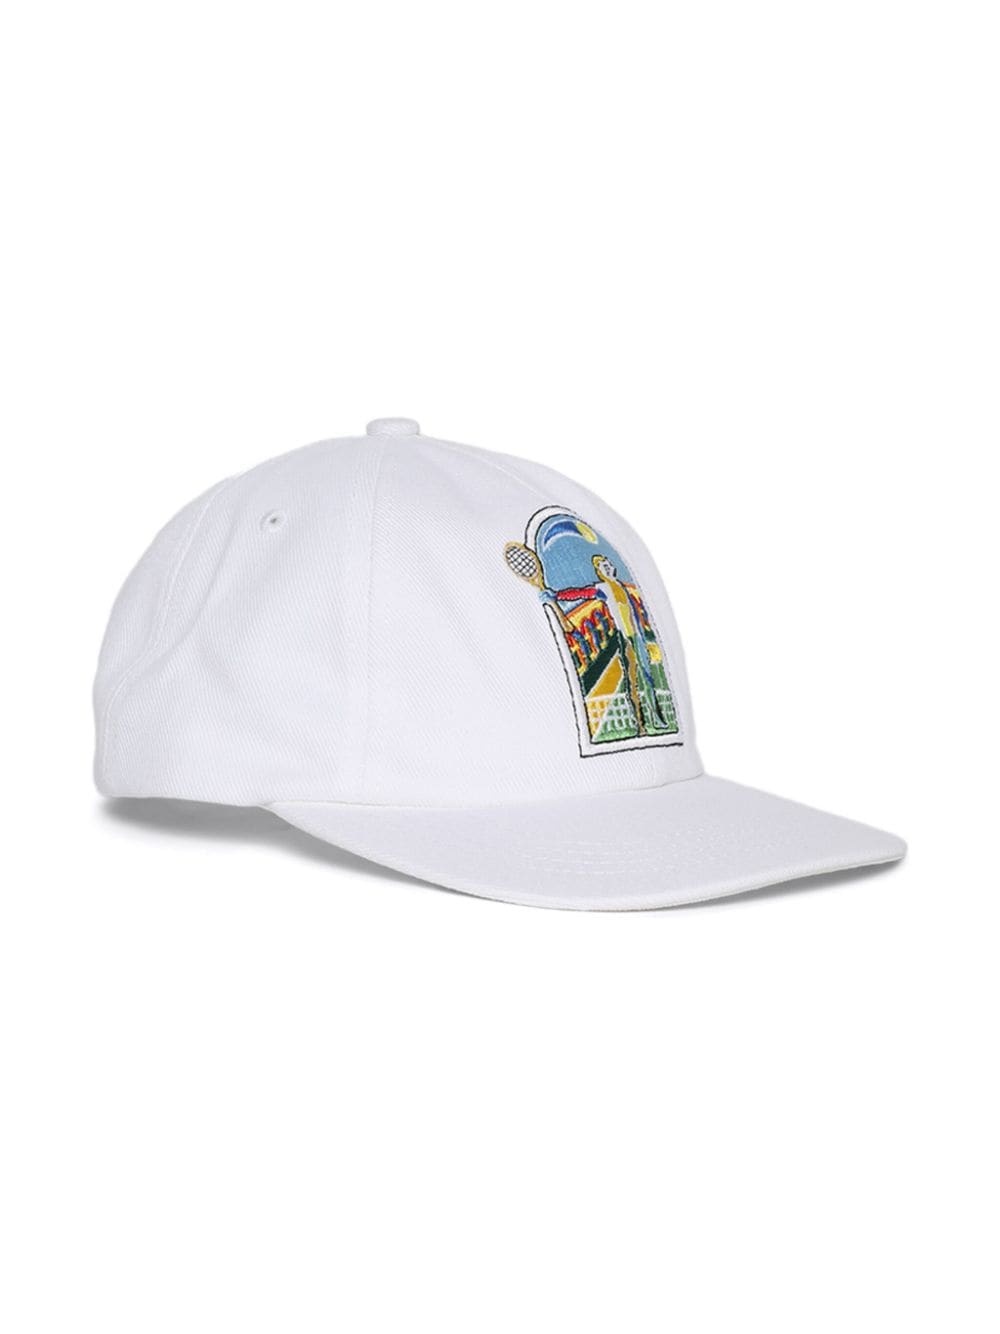 embroidered canvas cap - 2